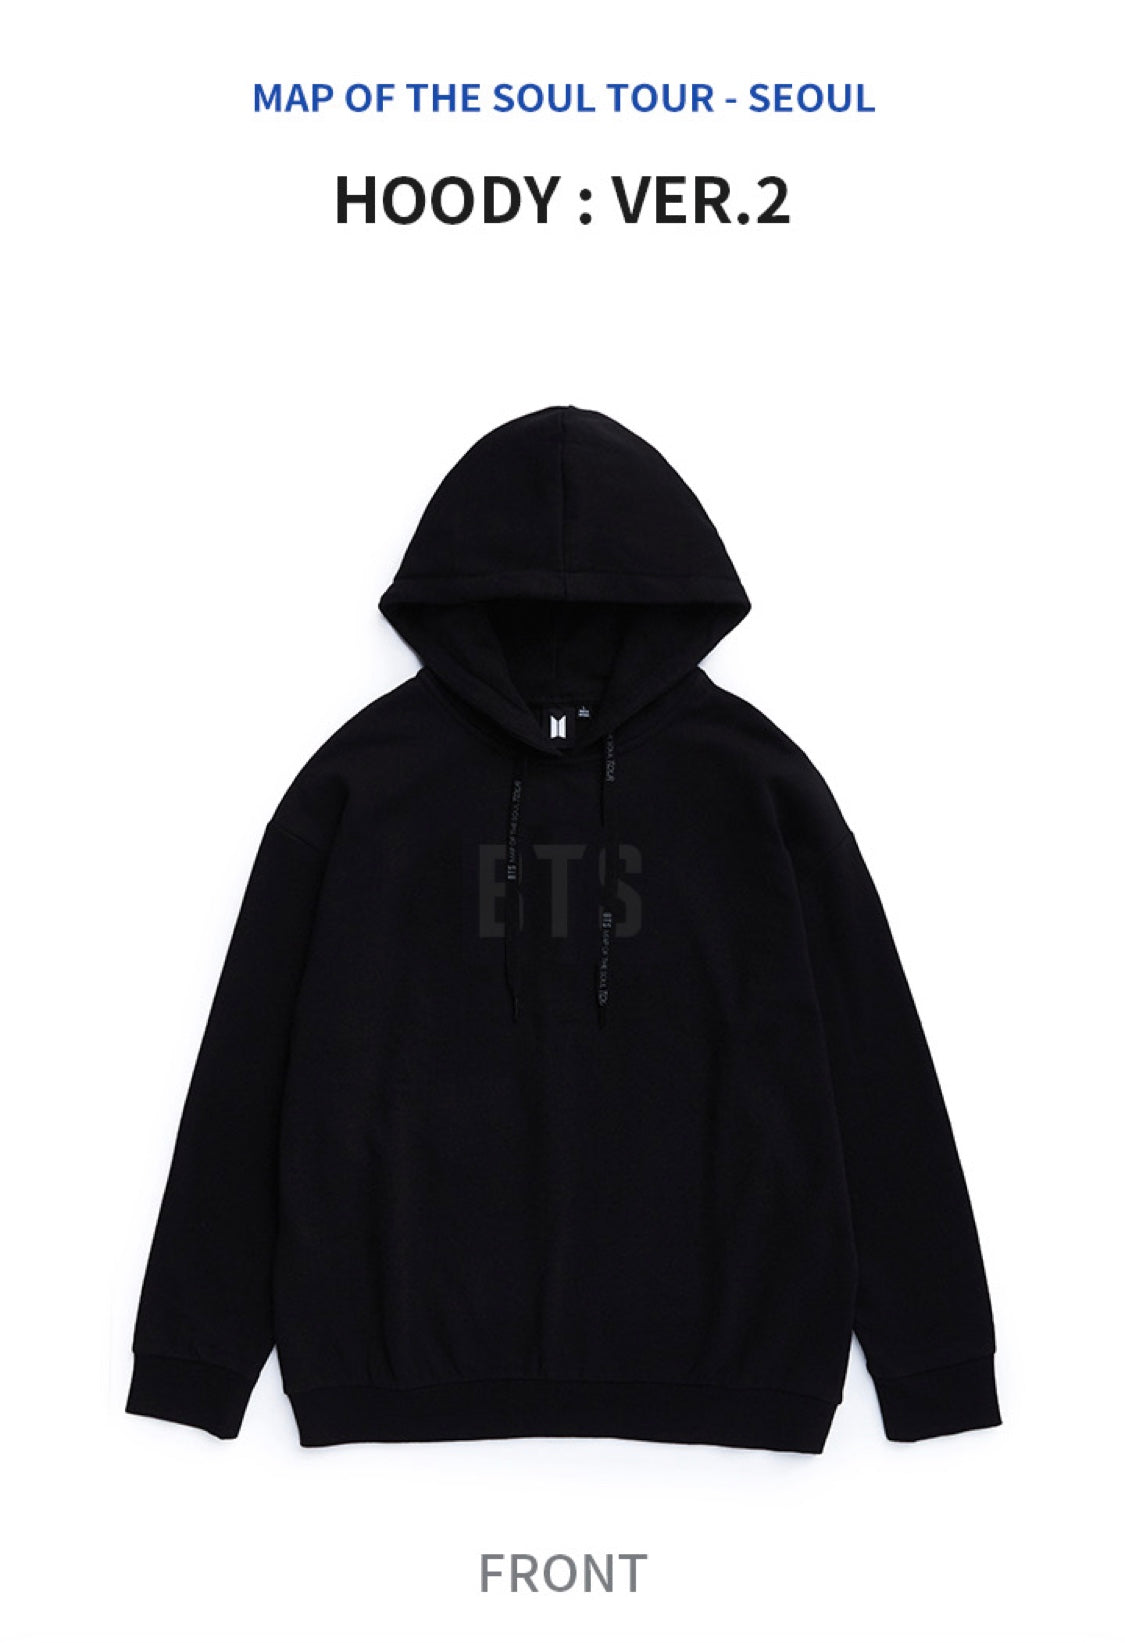 BTS MAP OF THE SOUL TOUR HOODY VER.2